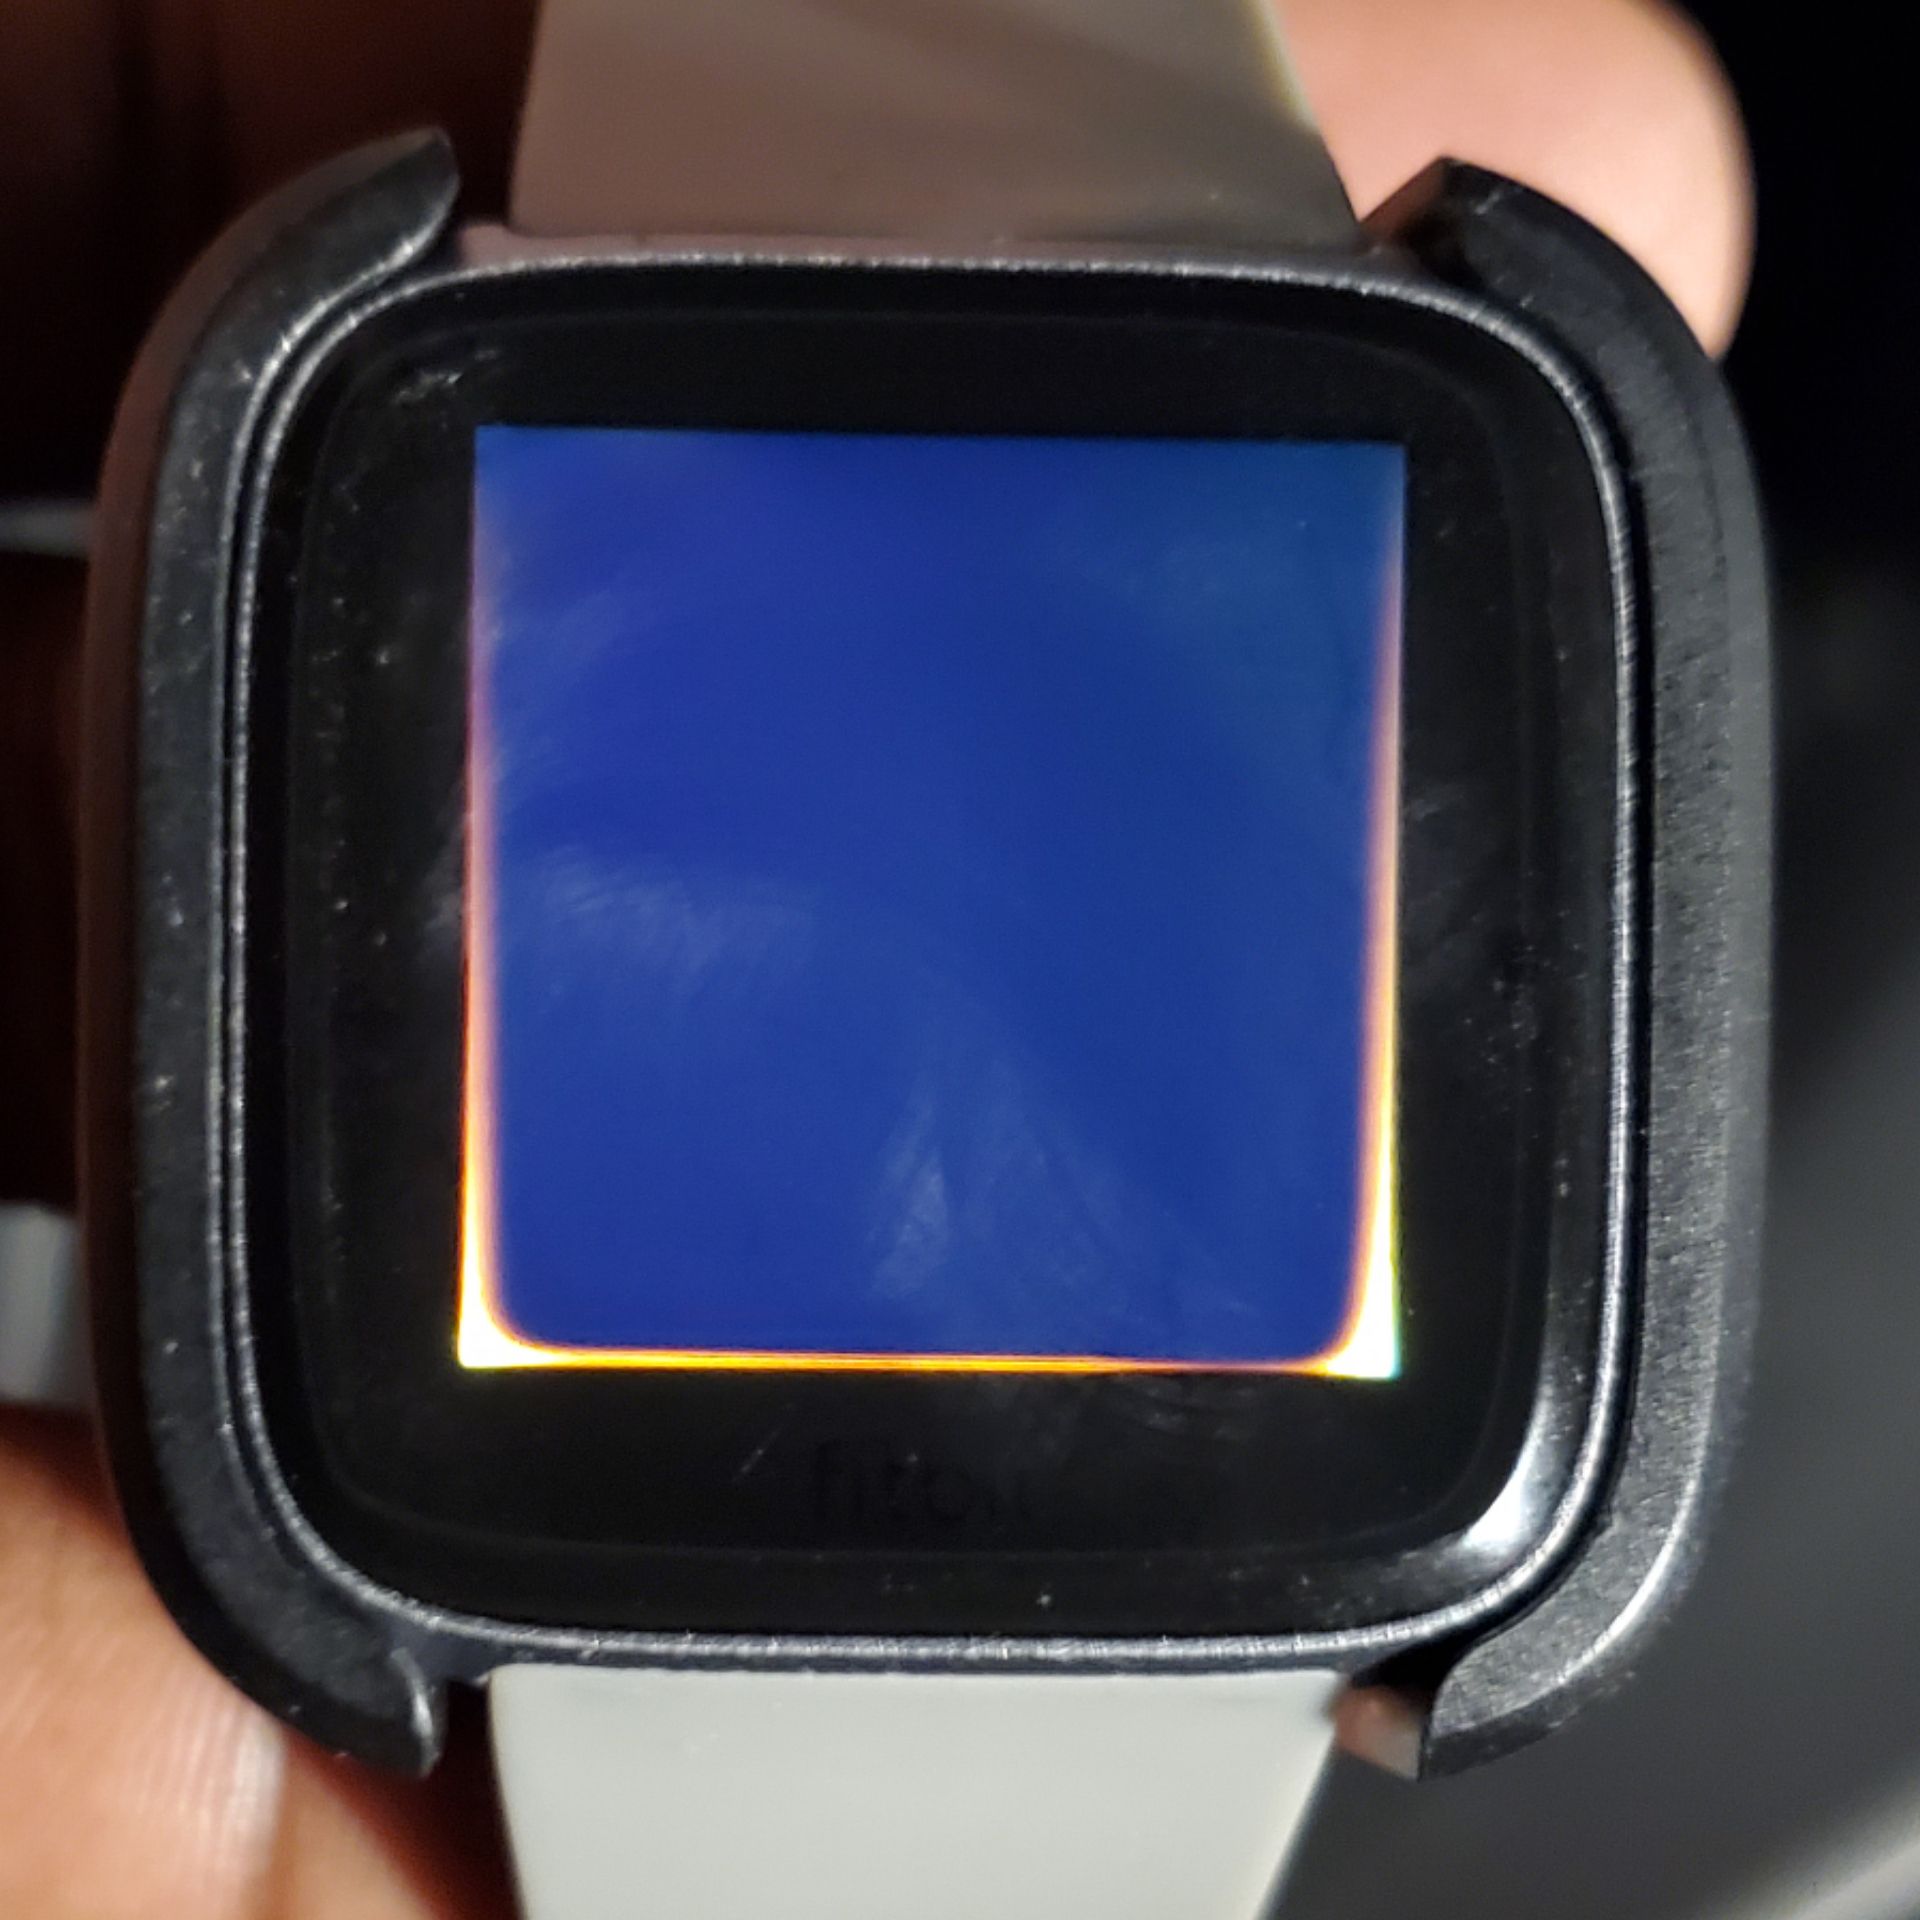 the screen on my fitbit is blank